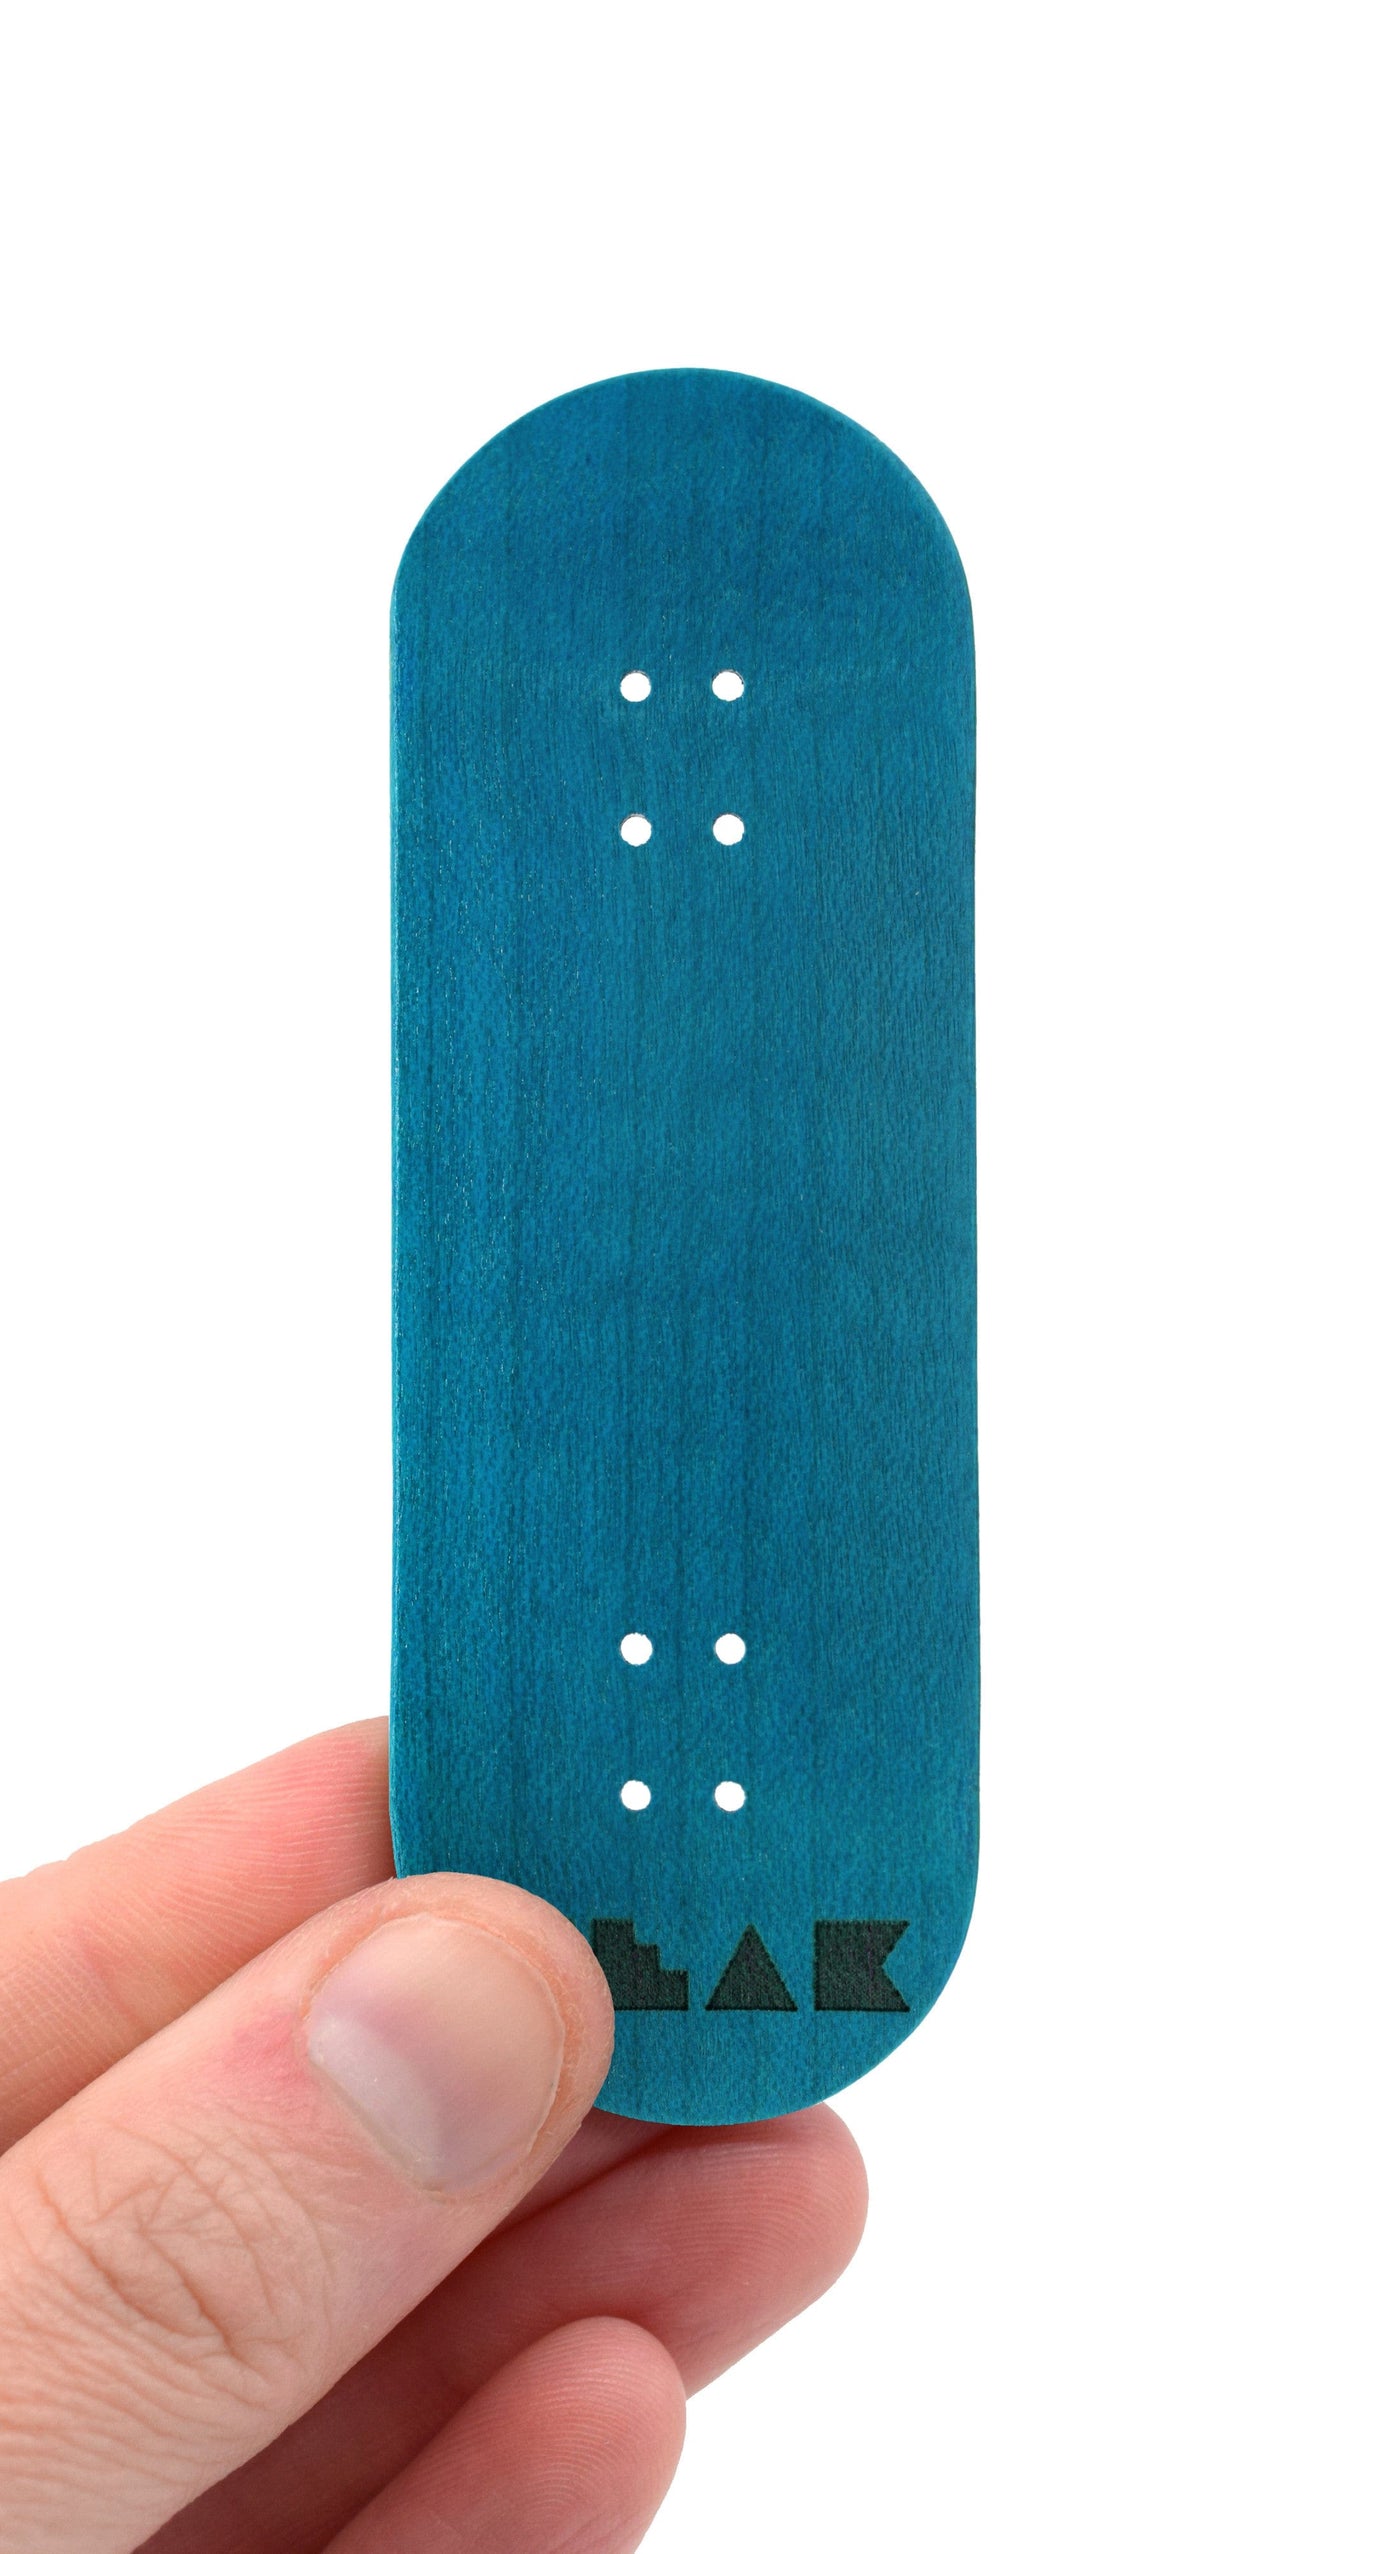 Teak Tuning PROlific Wooden 5 Ply Fingerboard Deck 32x95mm - Teak Teal - with Color Matching Mid Ply